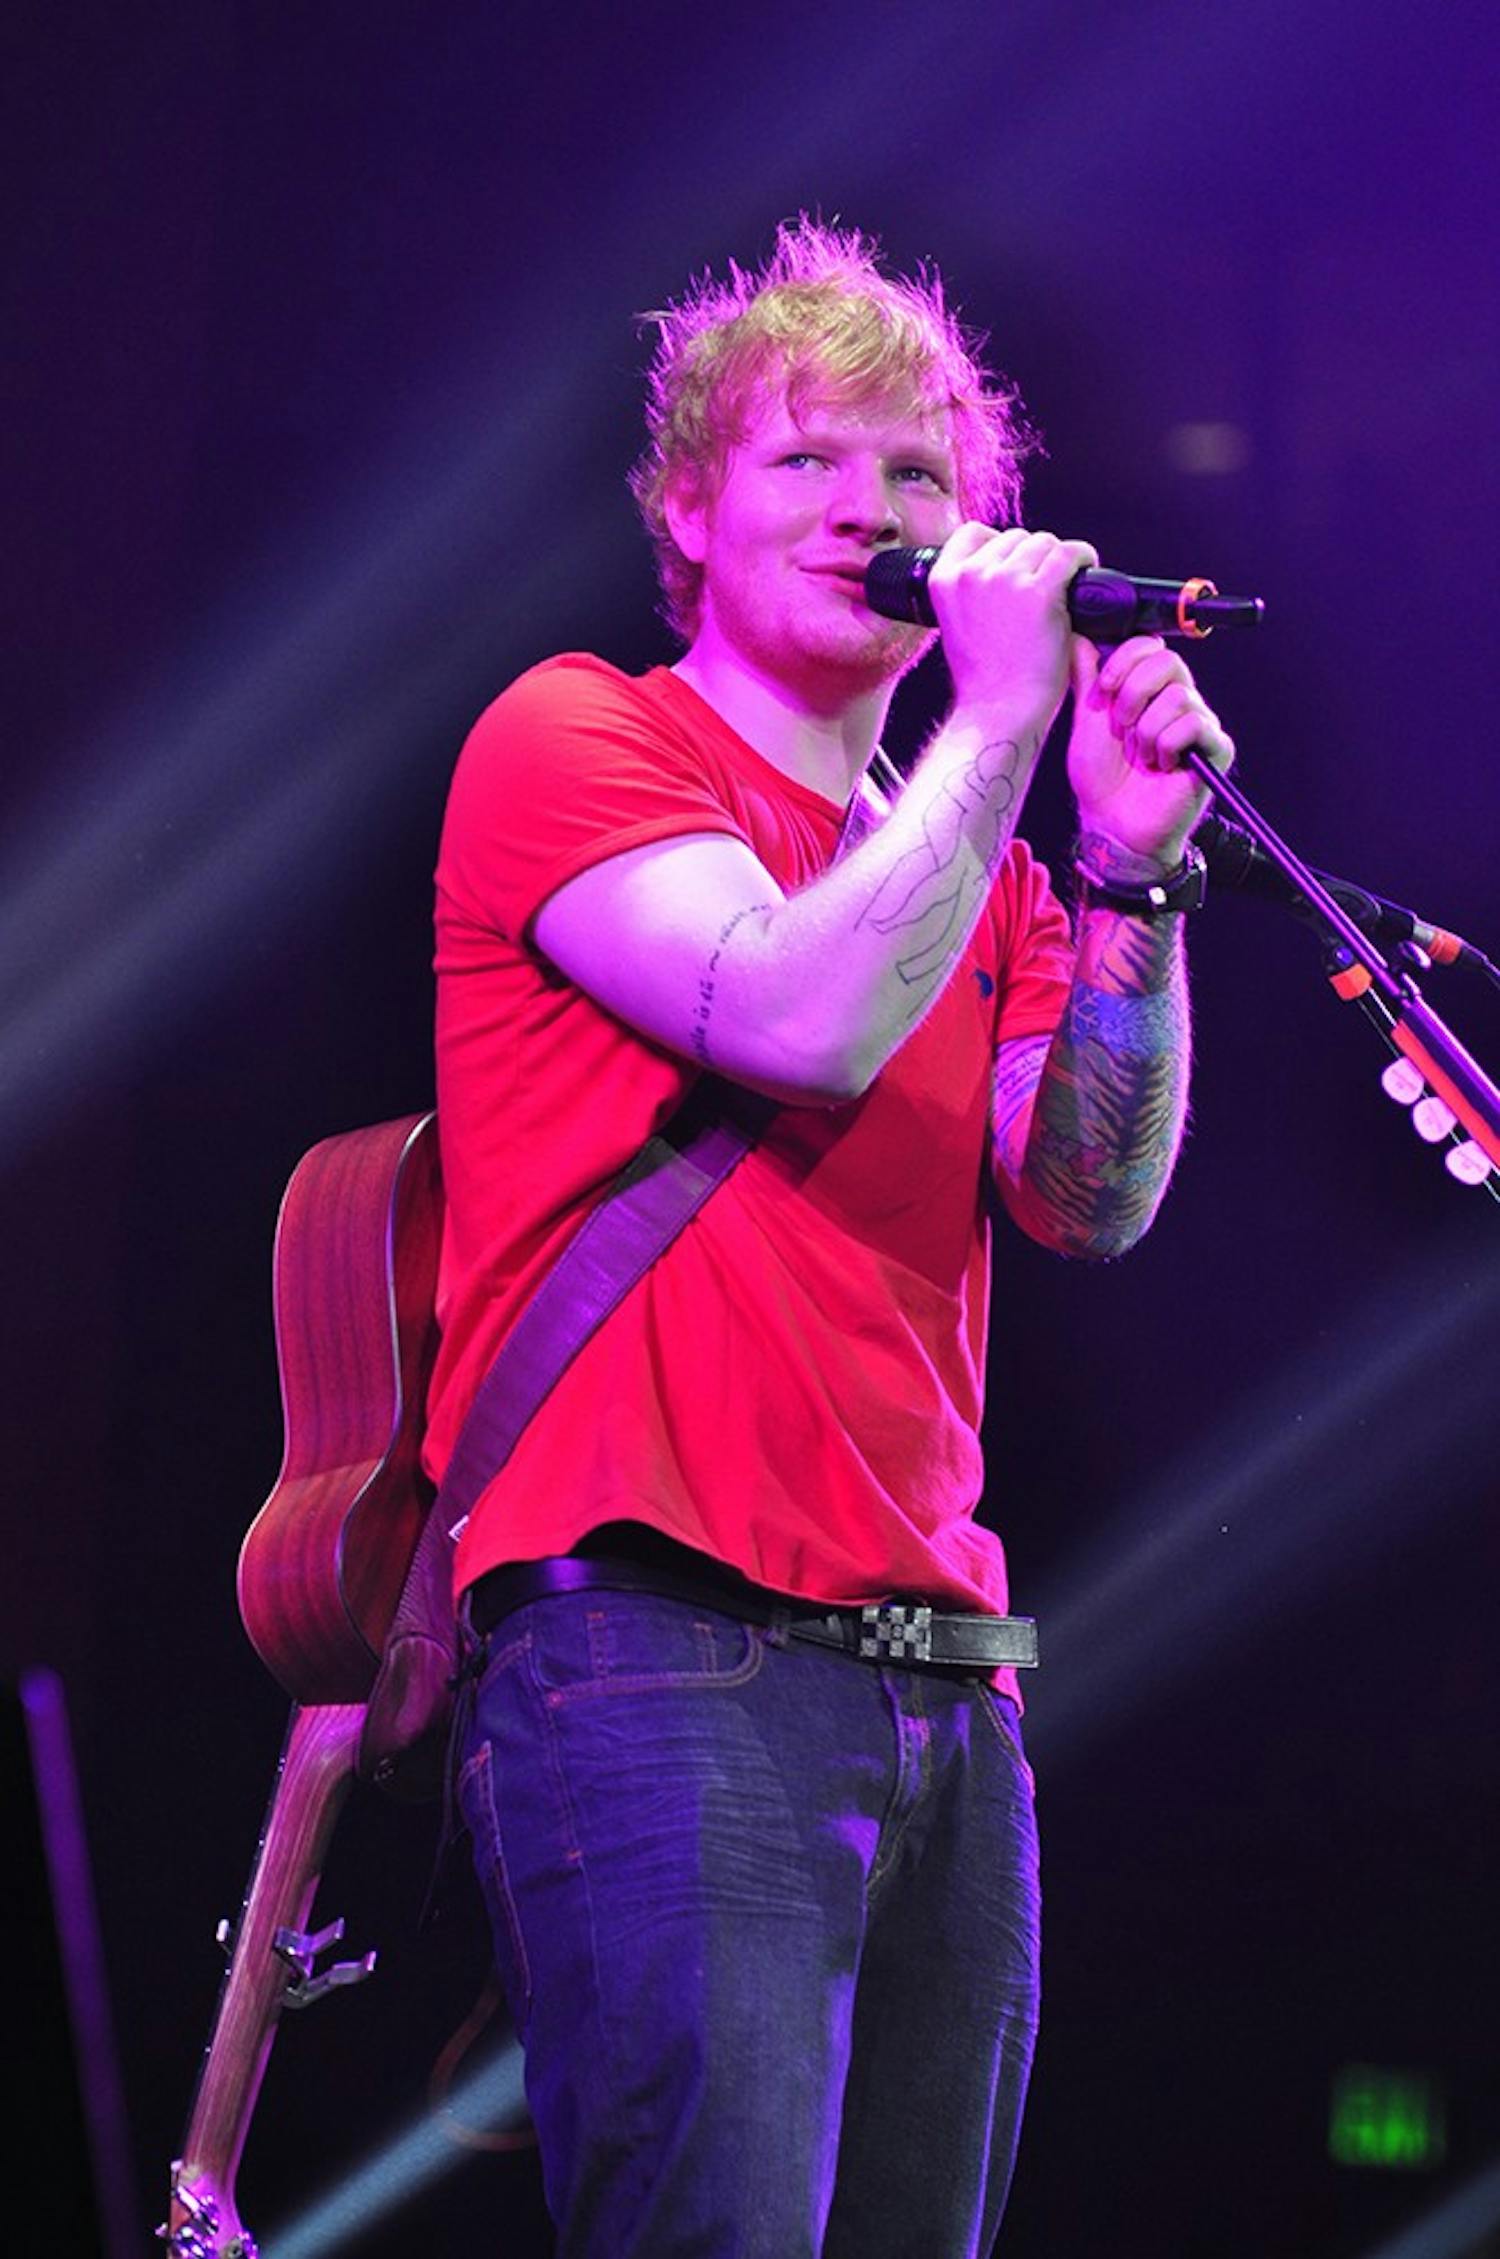 Ed Sheeran opened for Taylor Swift Saturday at the Colonial Life Arena